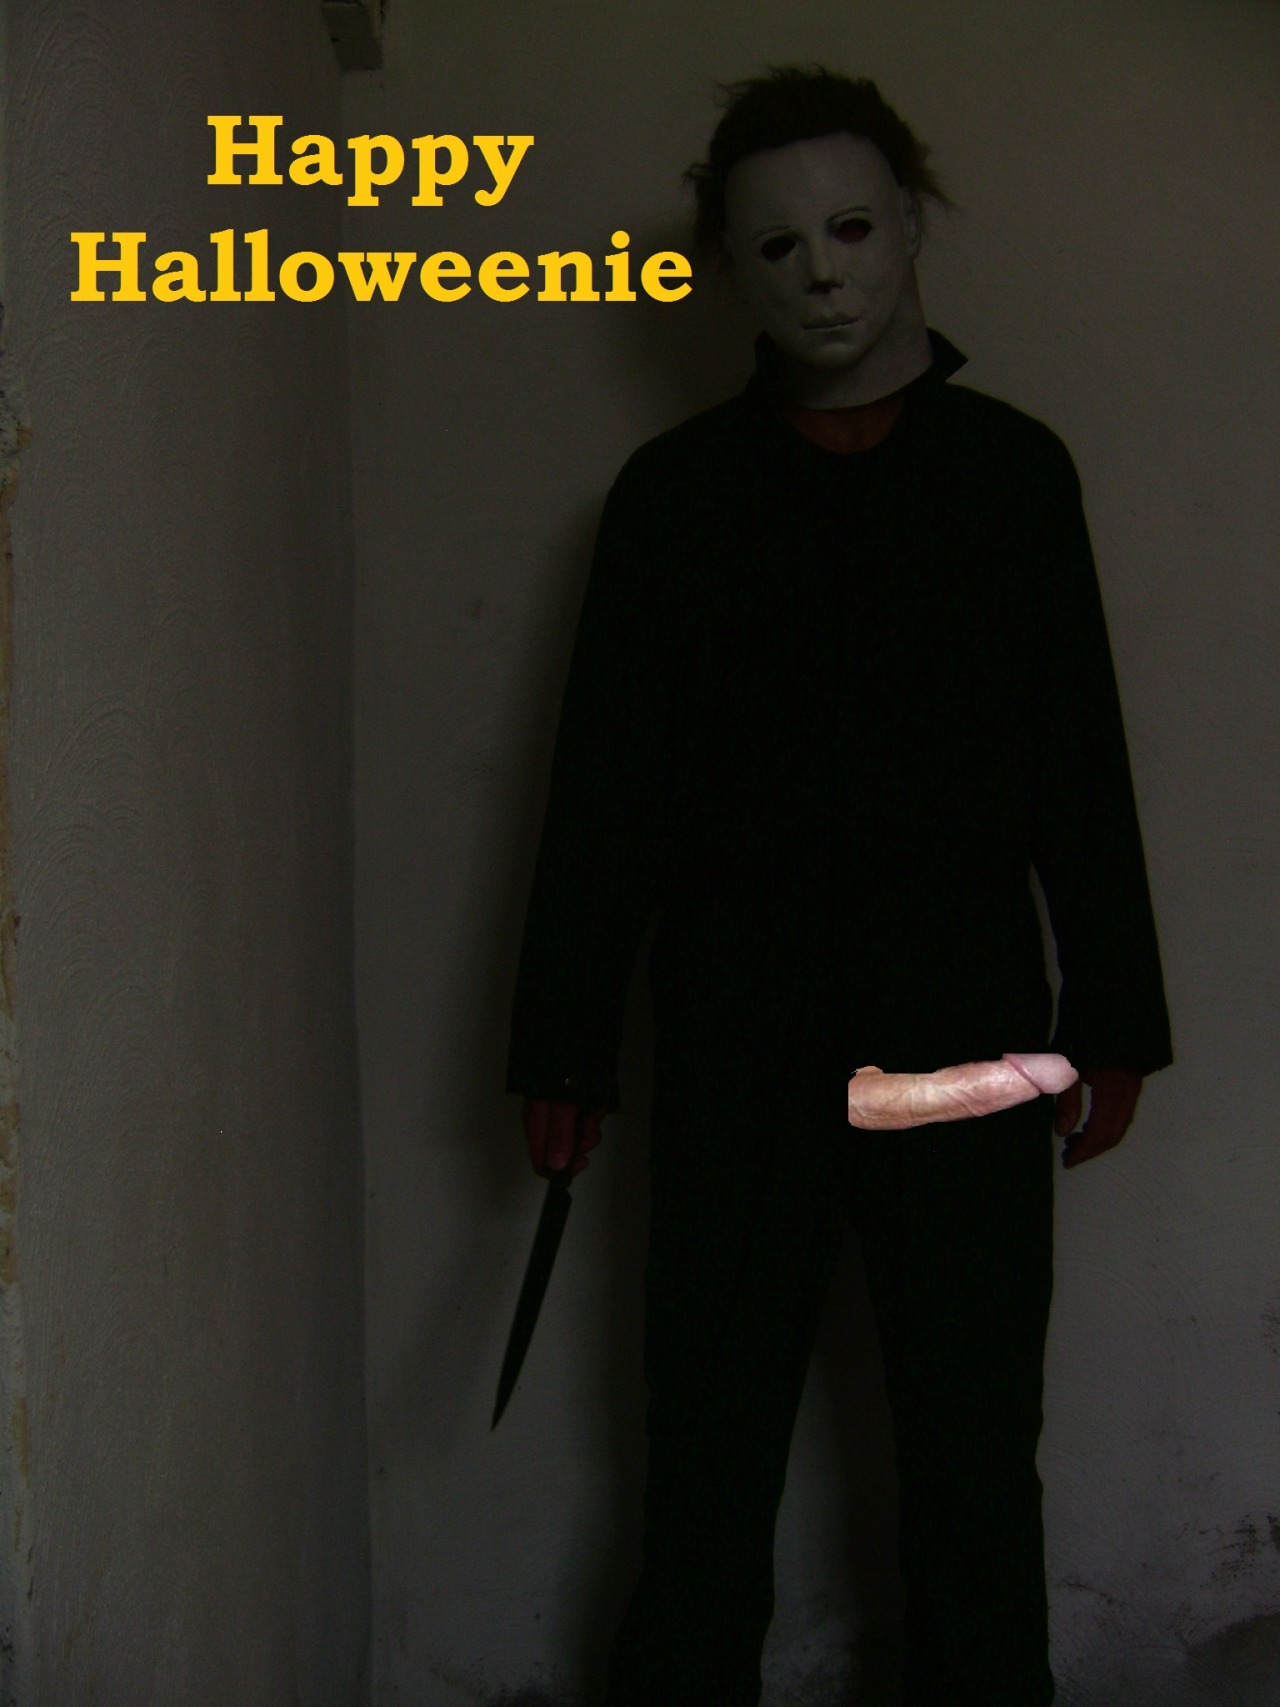 Check out that hot dong on Michael Myers! Careful, though, you don’t want to trip